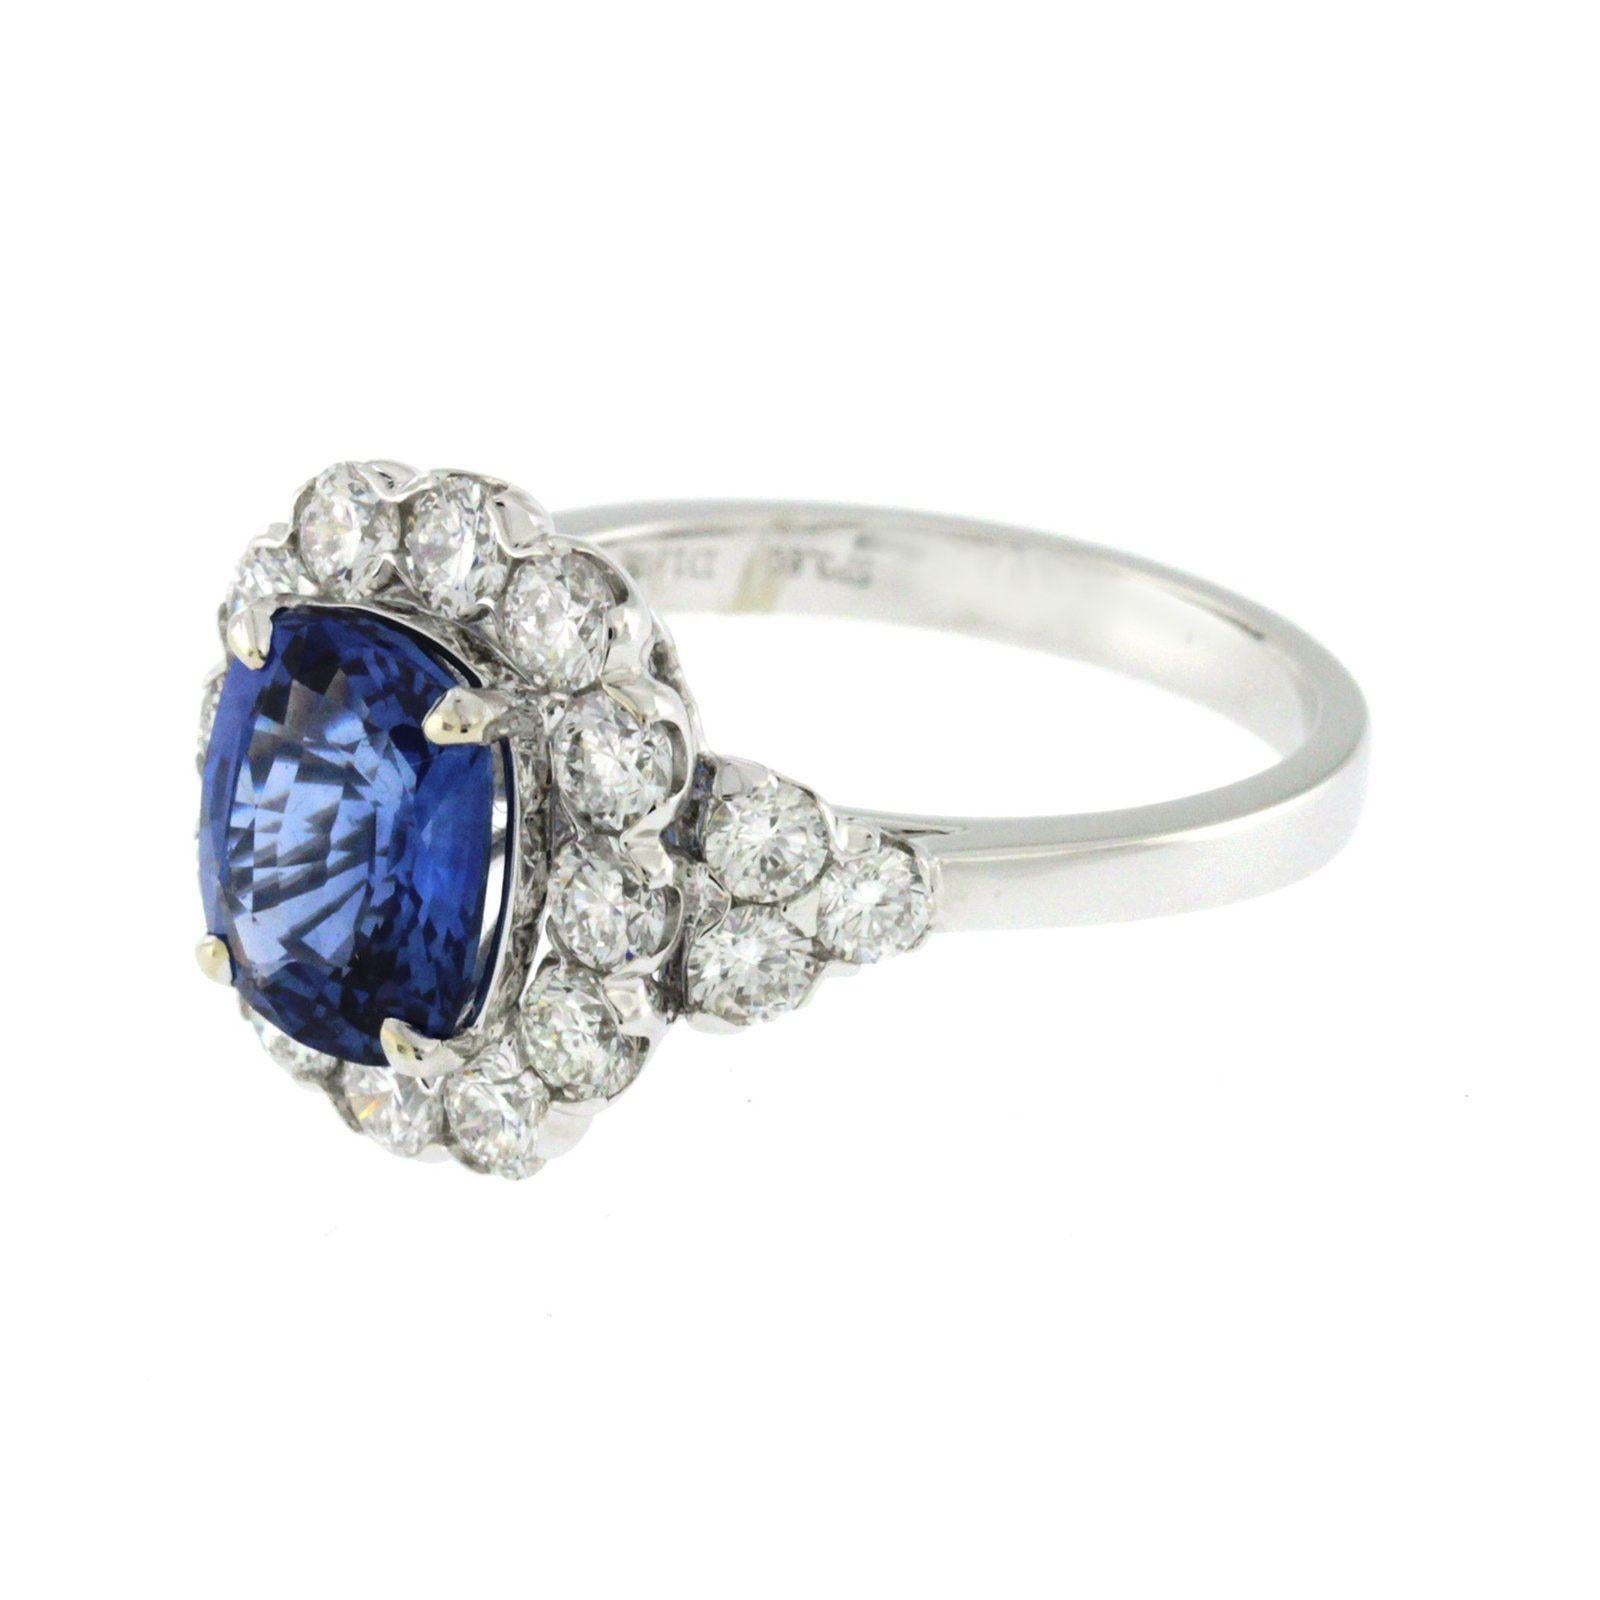 White 3 Ct Ceylon Sapphires & 1.48 Ct Diamonds In 18k Gold Engagement Ring For Sale 1